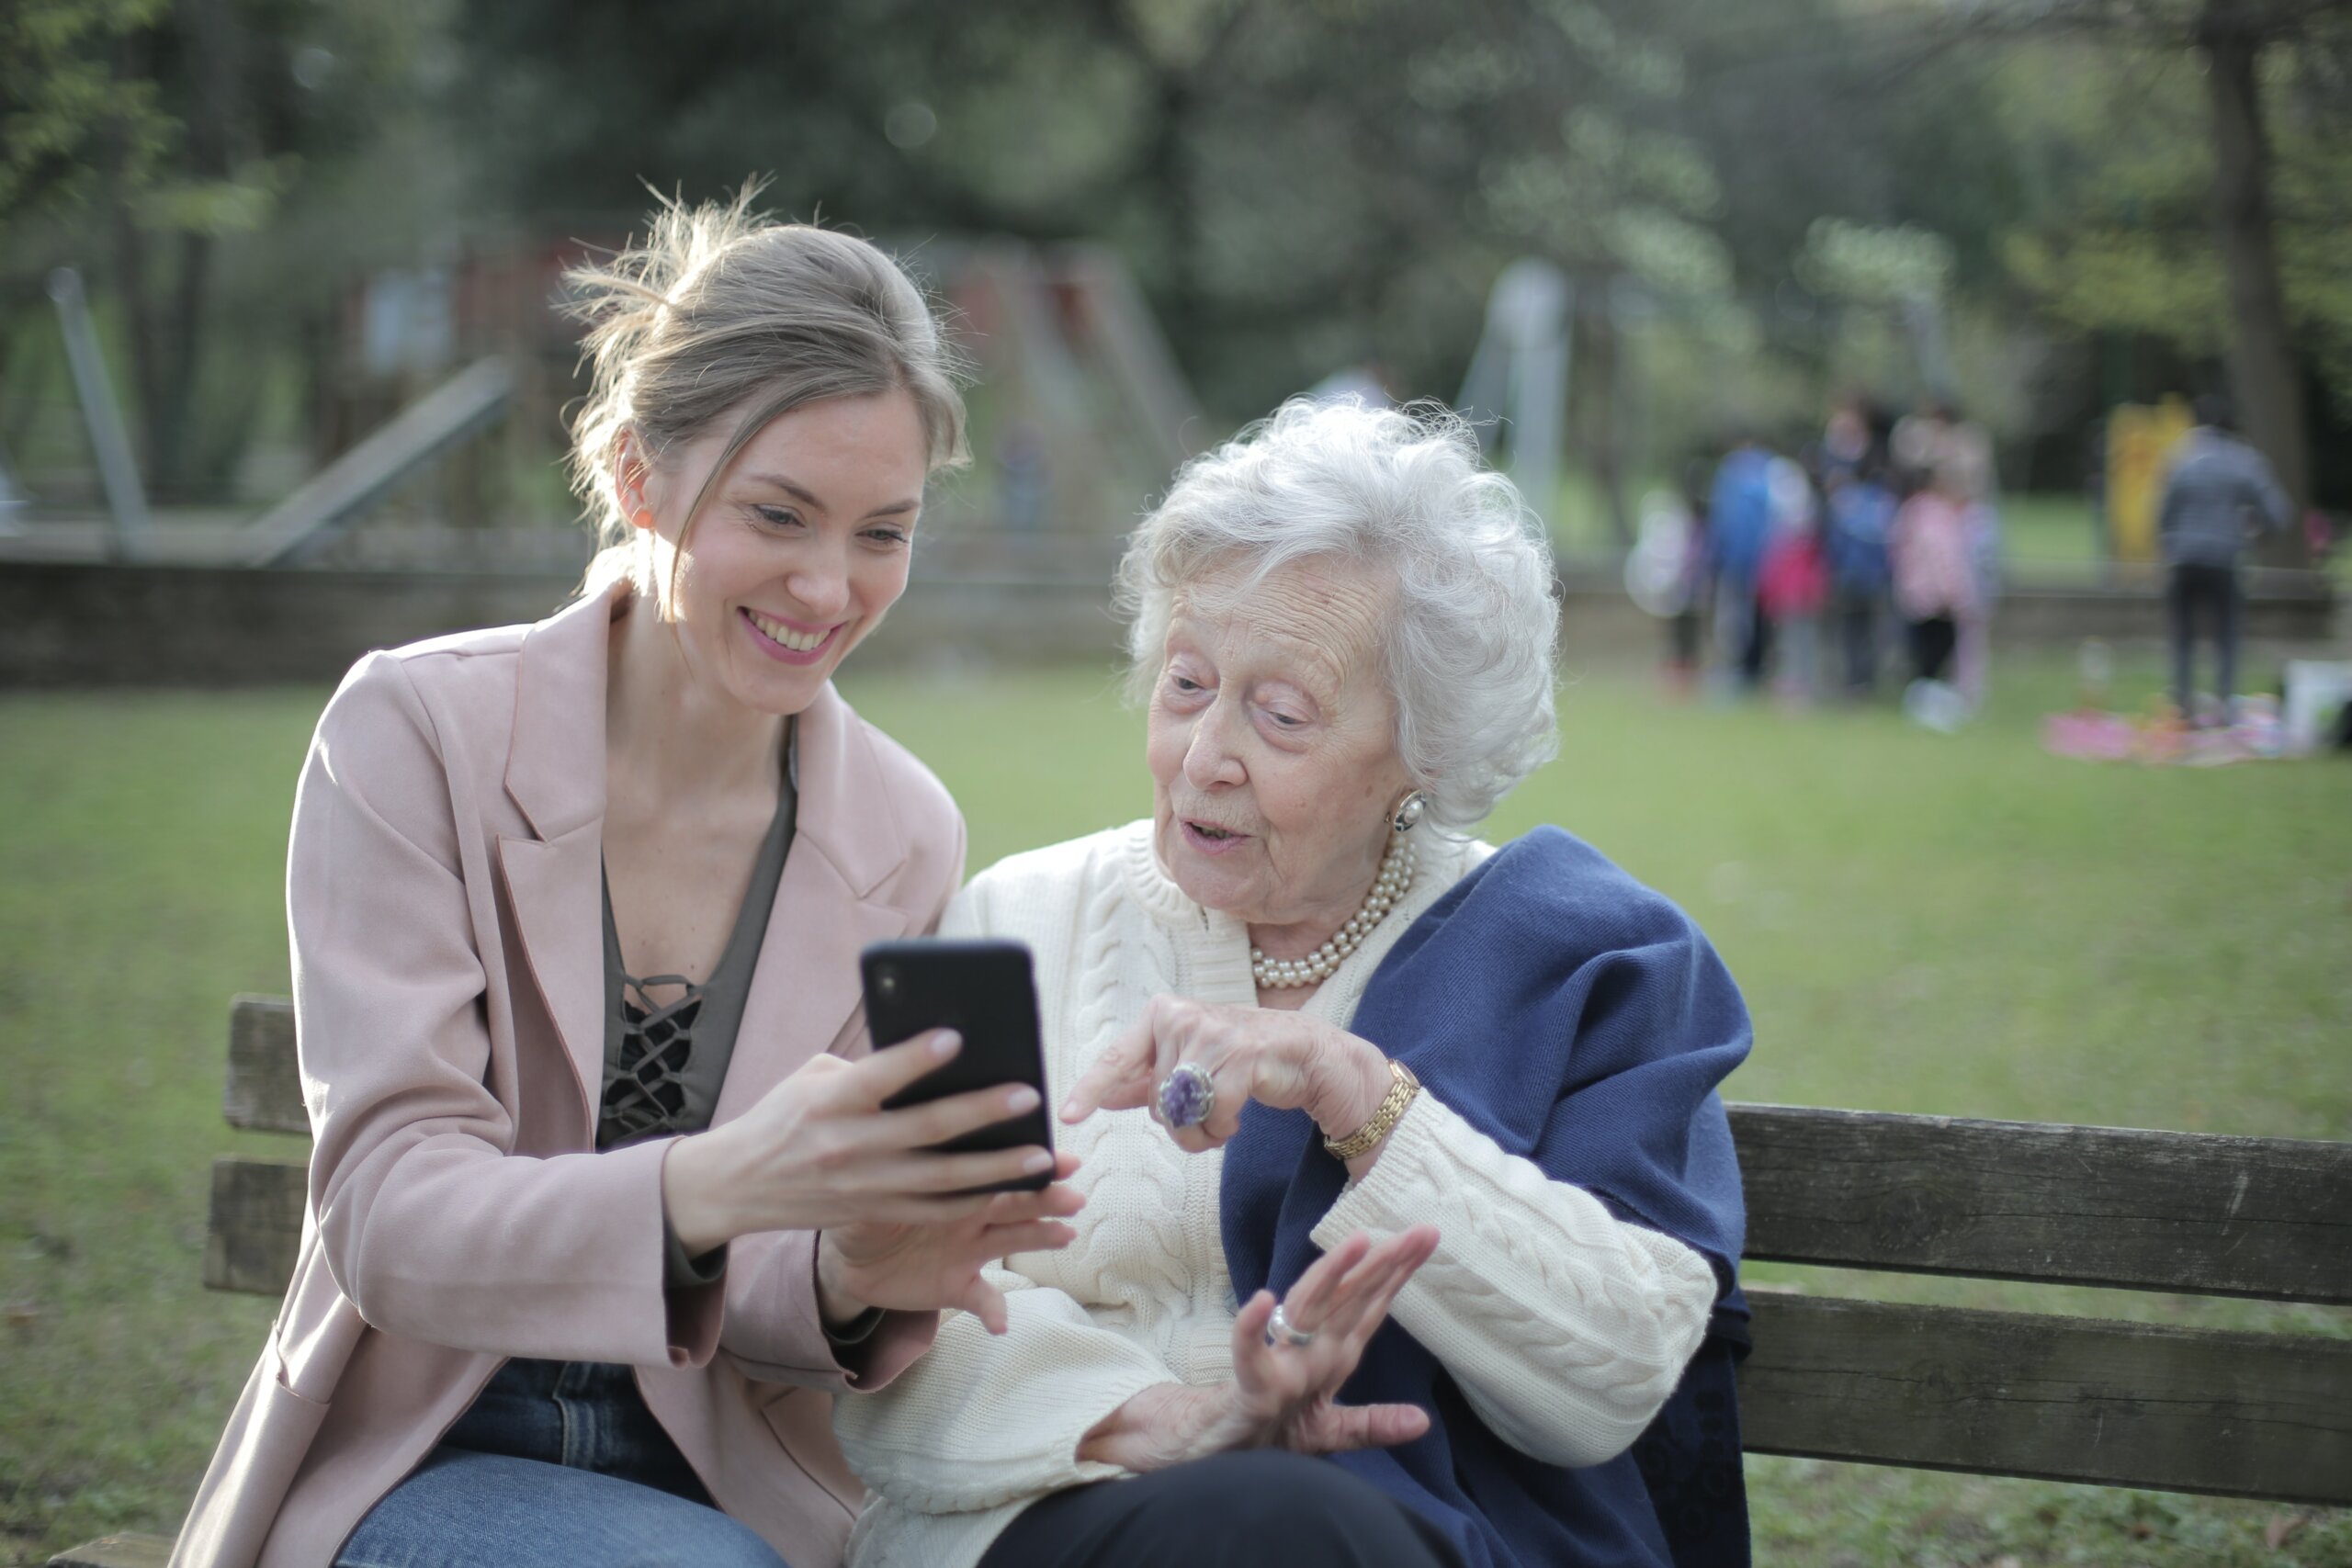 Daughter showing her grandmother Trayt.Health platform on her mobile device sitting on a park bench